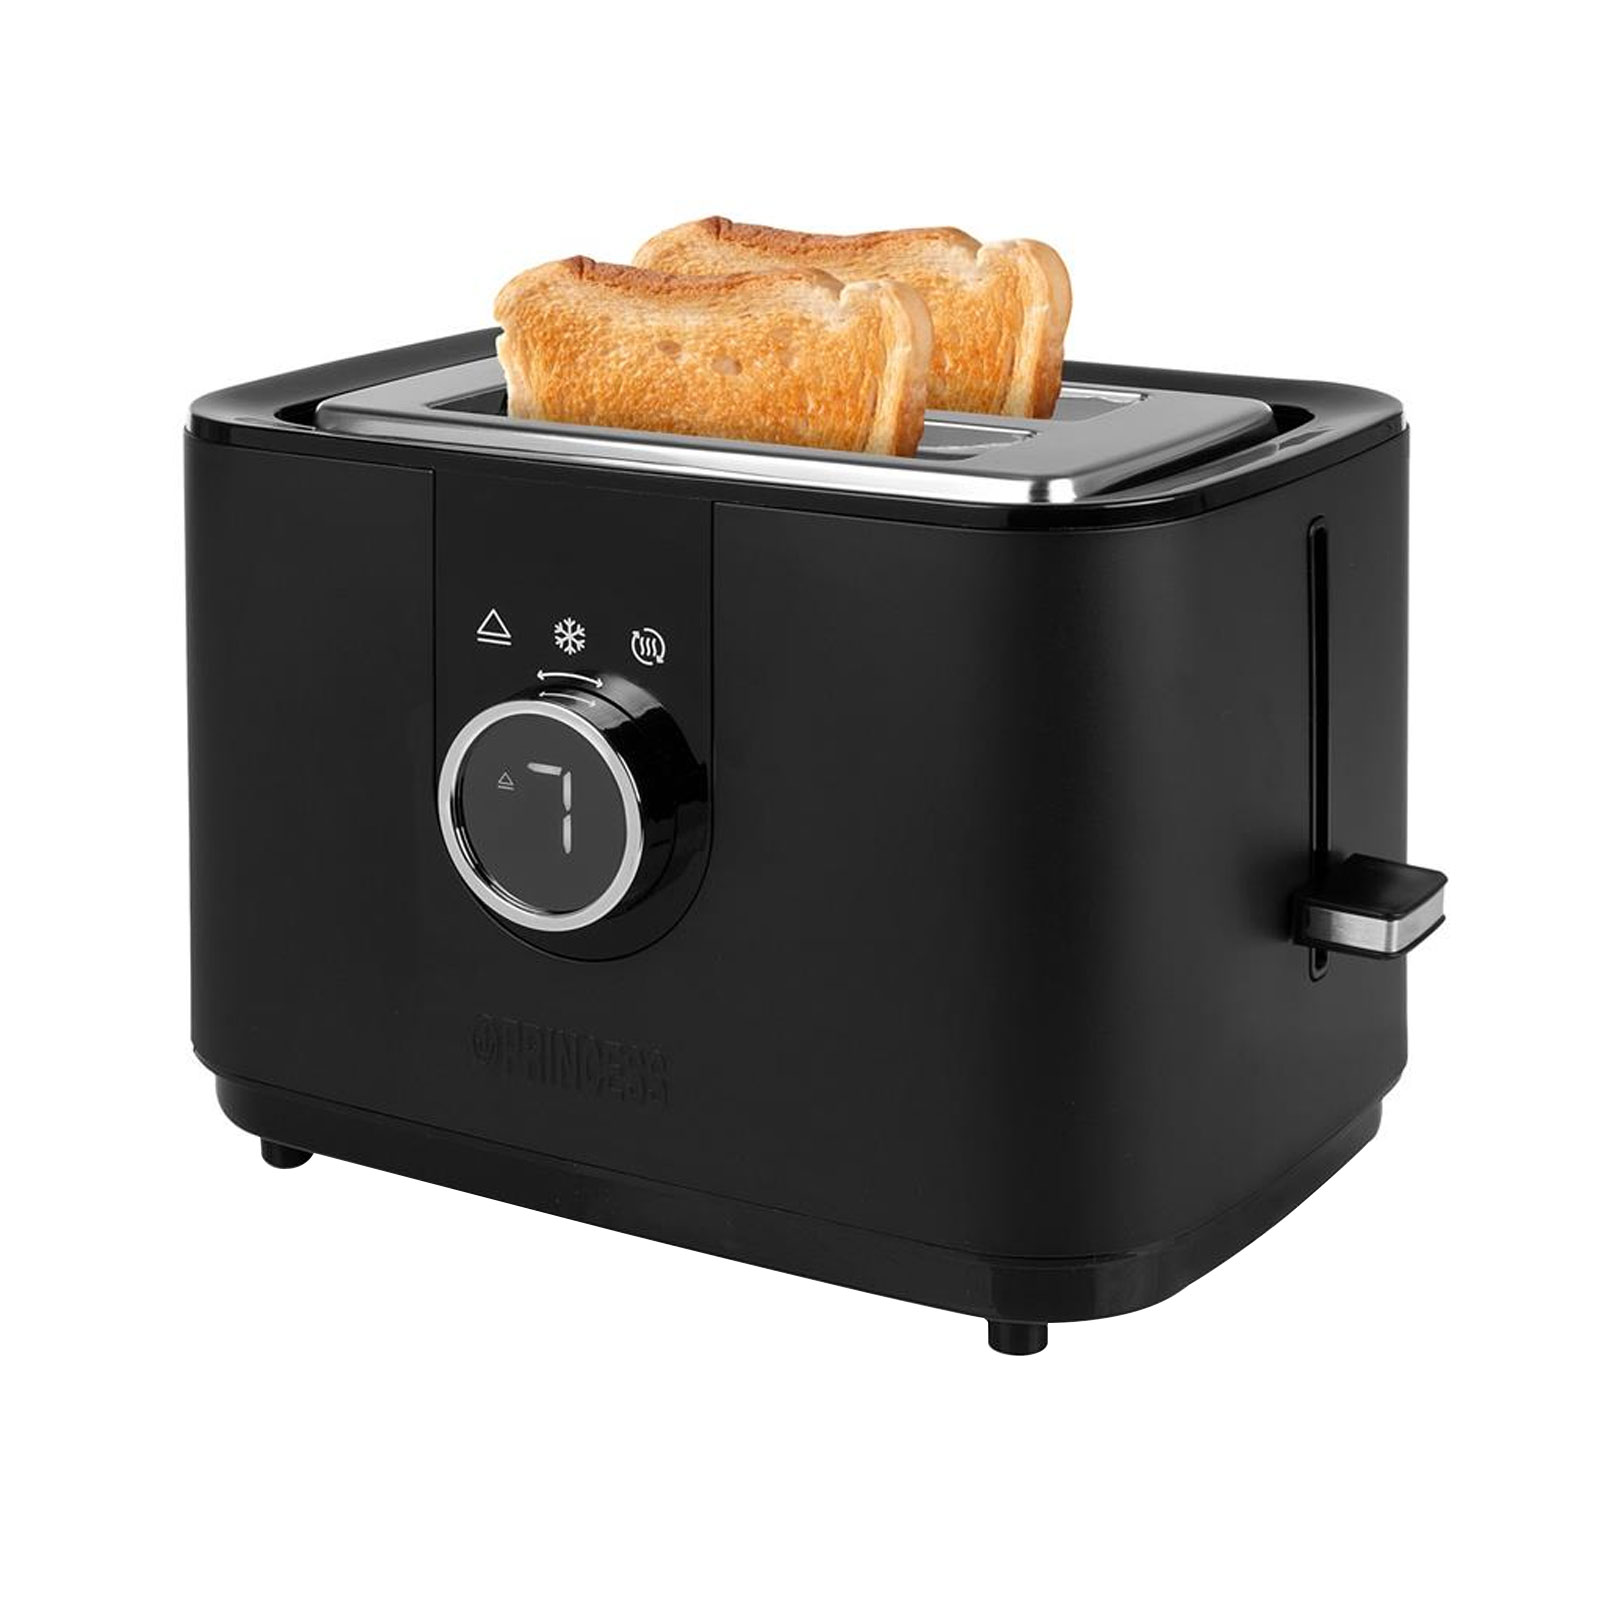 Princess 142360 Moments Toaster mit WiFi-Funktion